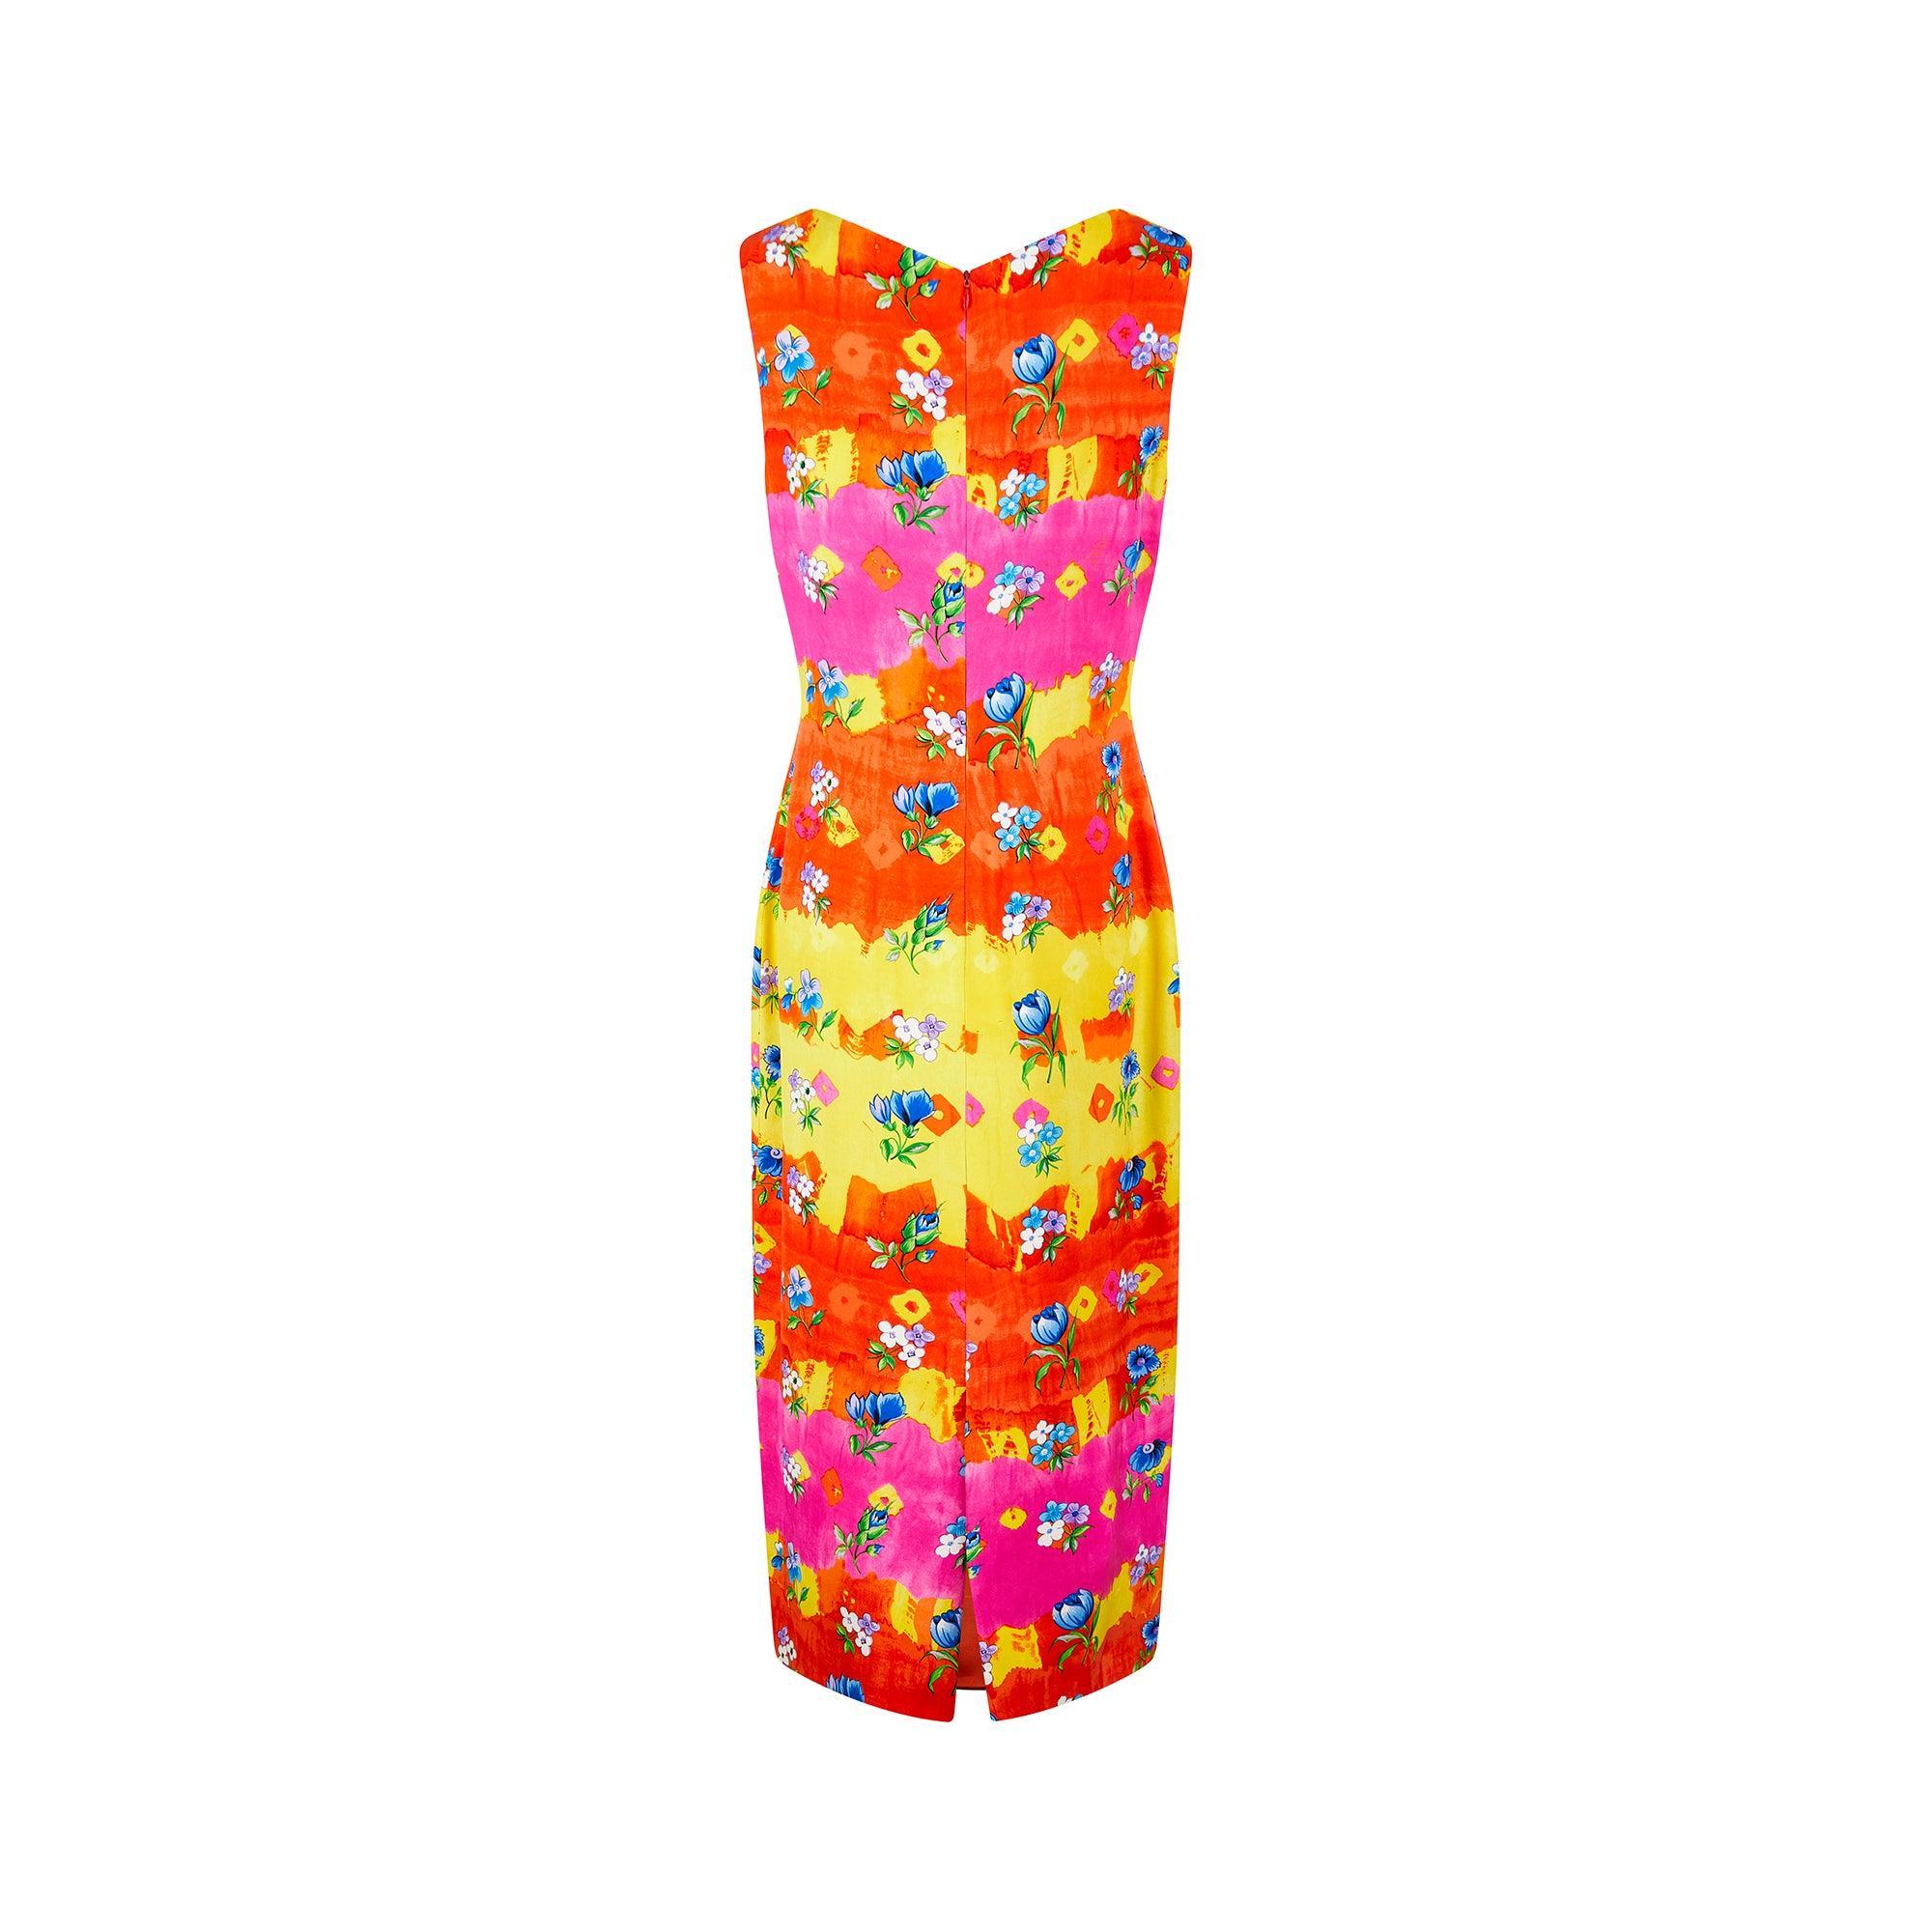 1993 Runway Gianni Versace Couture Floral Column Dress In Excellent Condition For Sale In London, GB